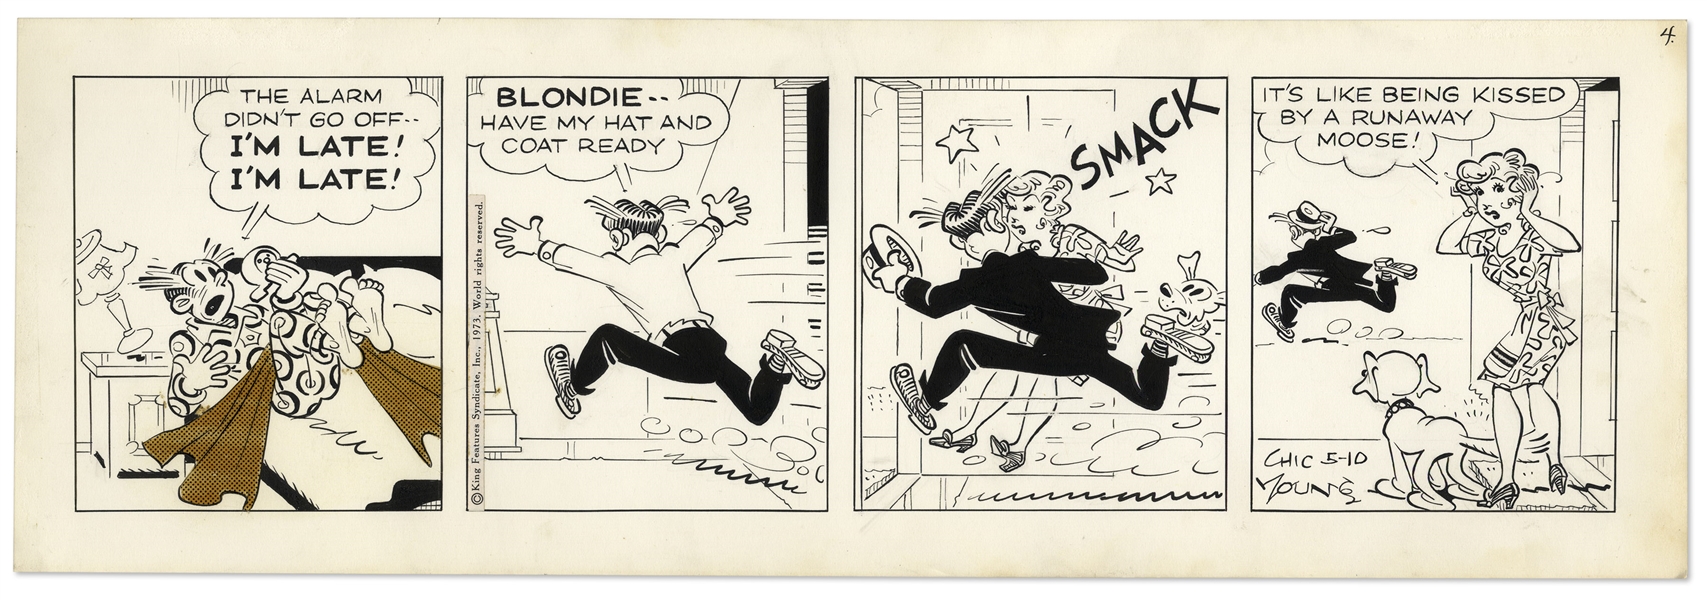 2 Chic Young Hand-Drawn ''Blondie'' Comic Strips From 1972 & 1973 -- With Chic Young's Original Artwork for One